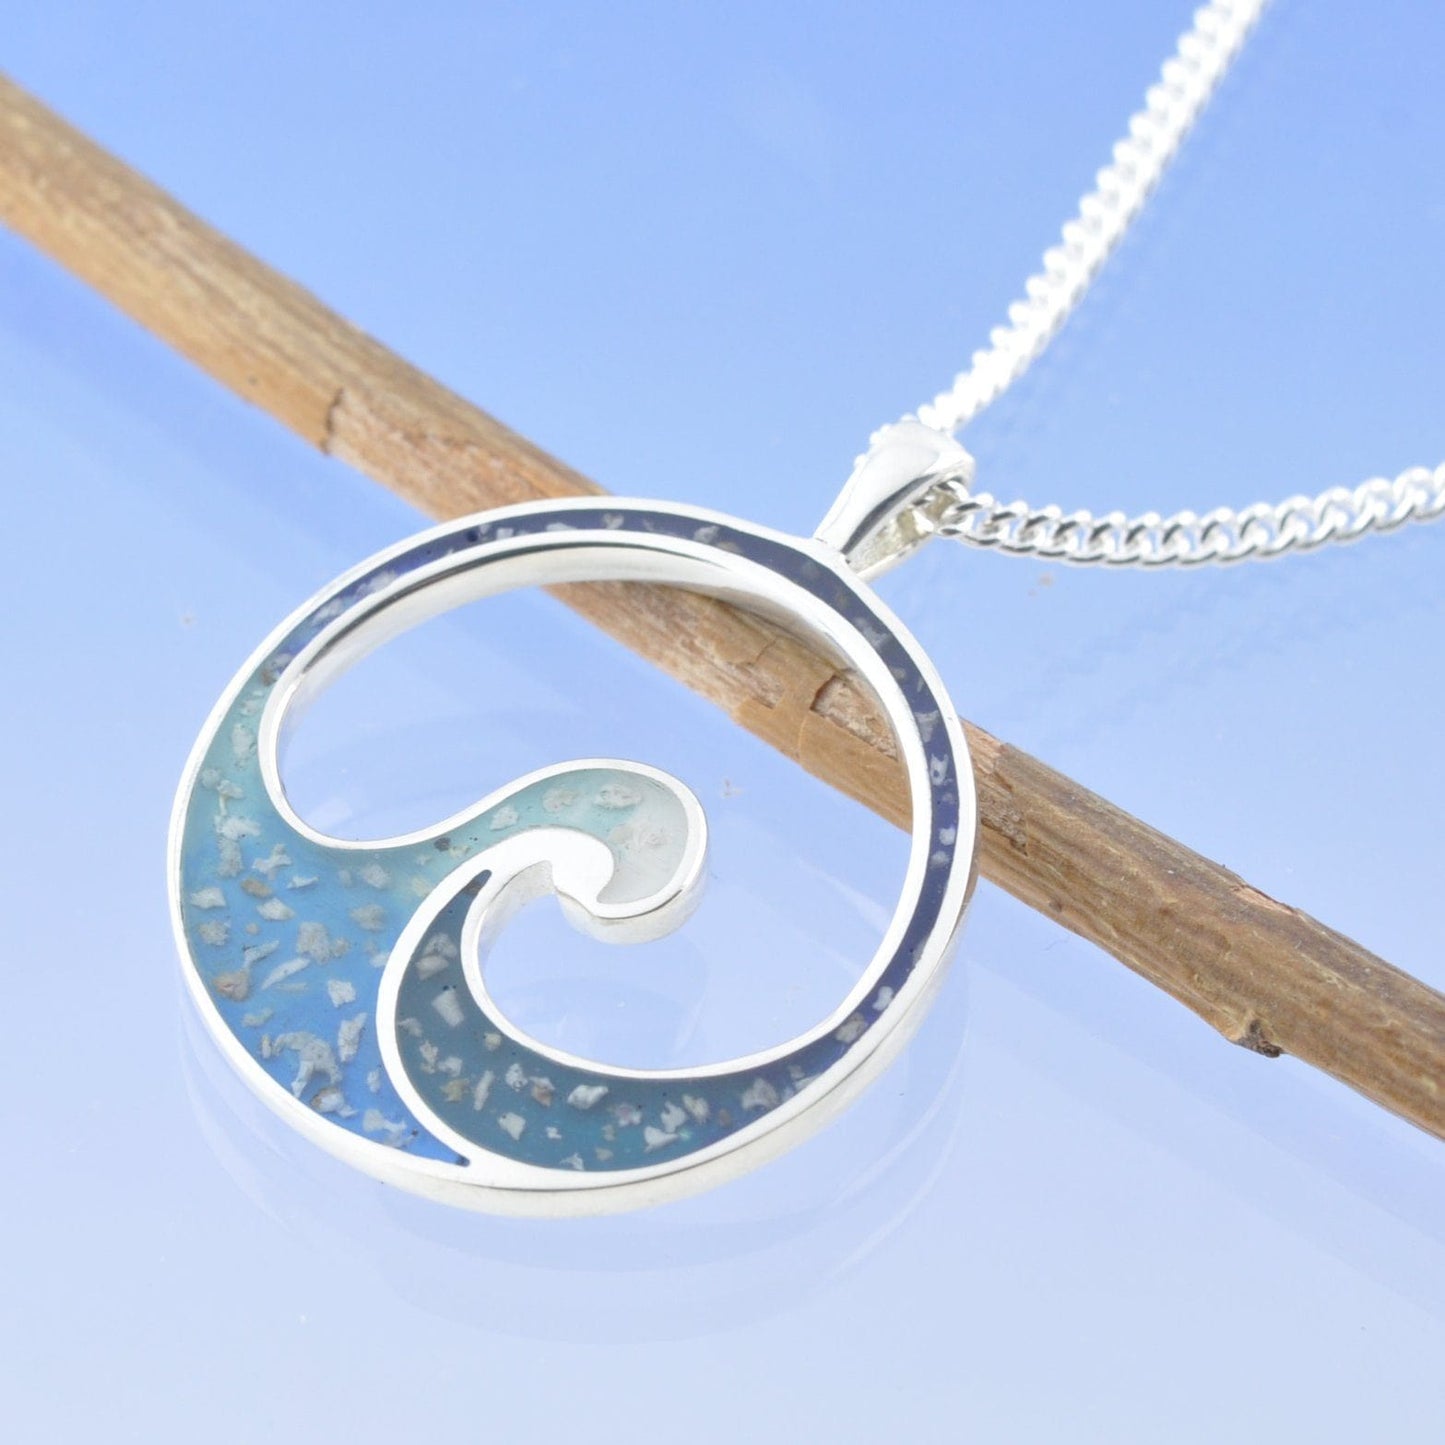 Cremation Ashes Necklace - Crashing Wave Pendant by Chris Parry Jewellery